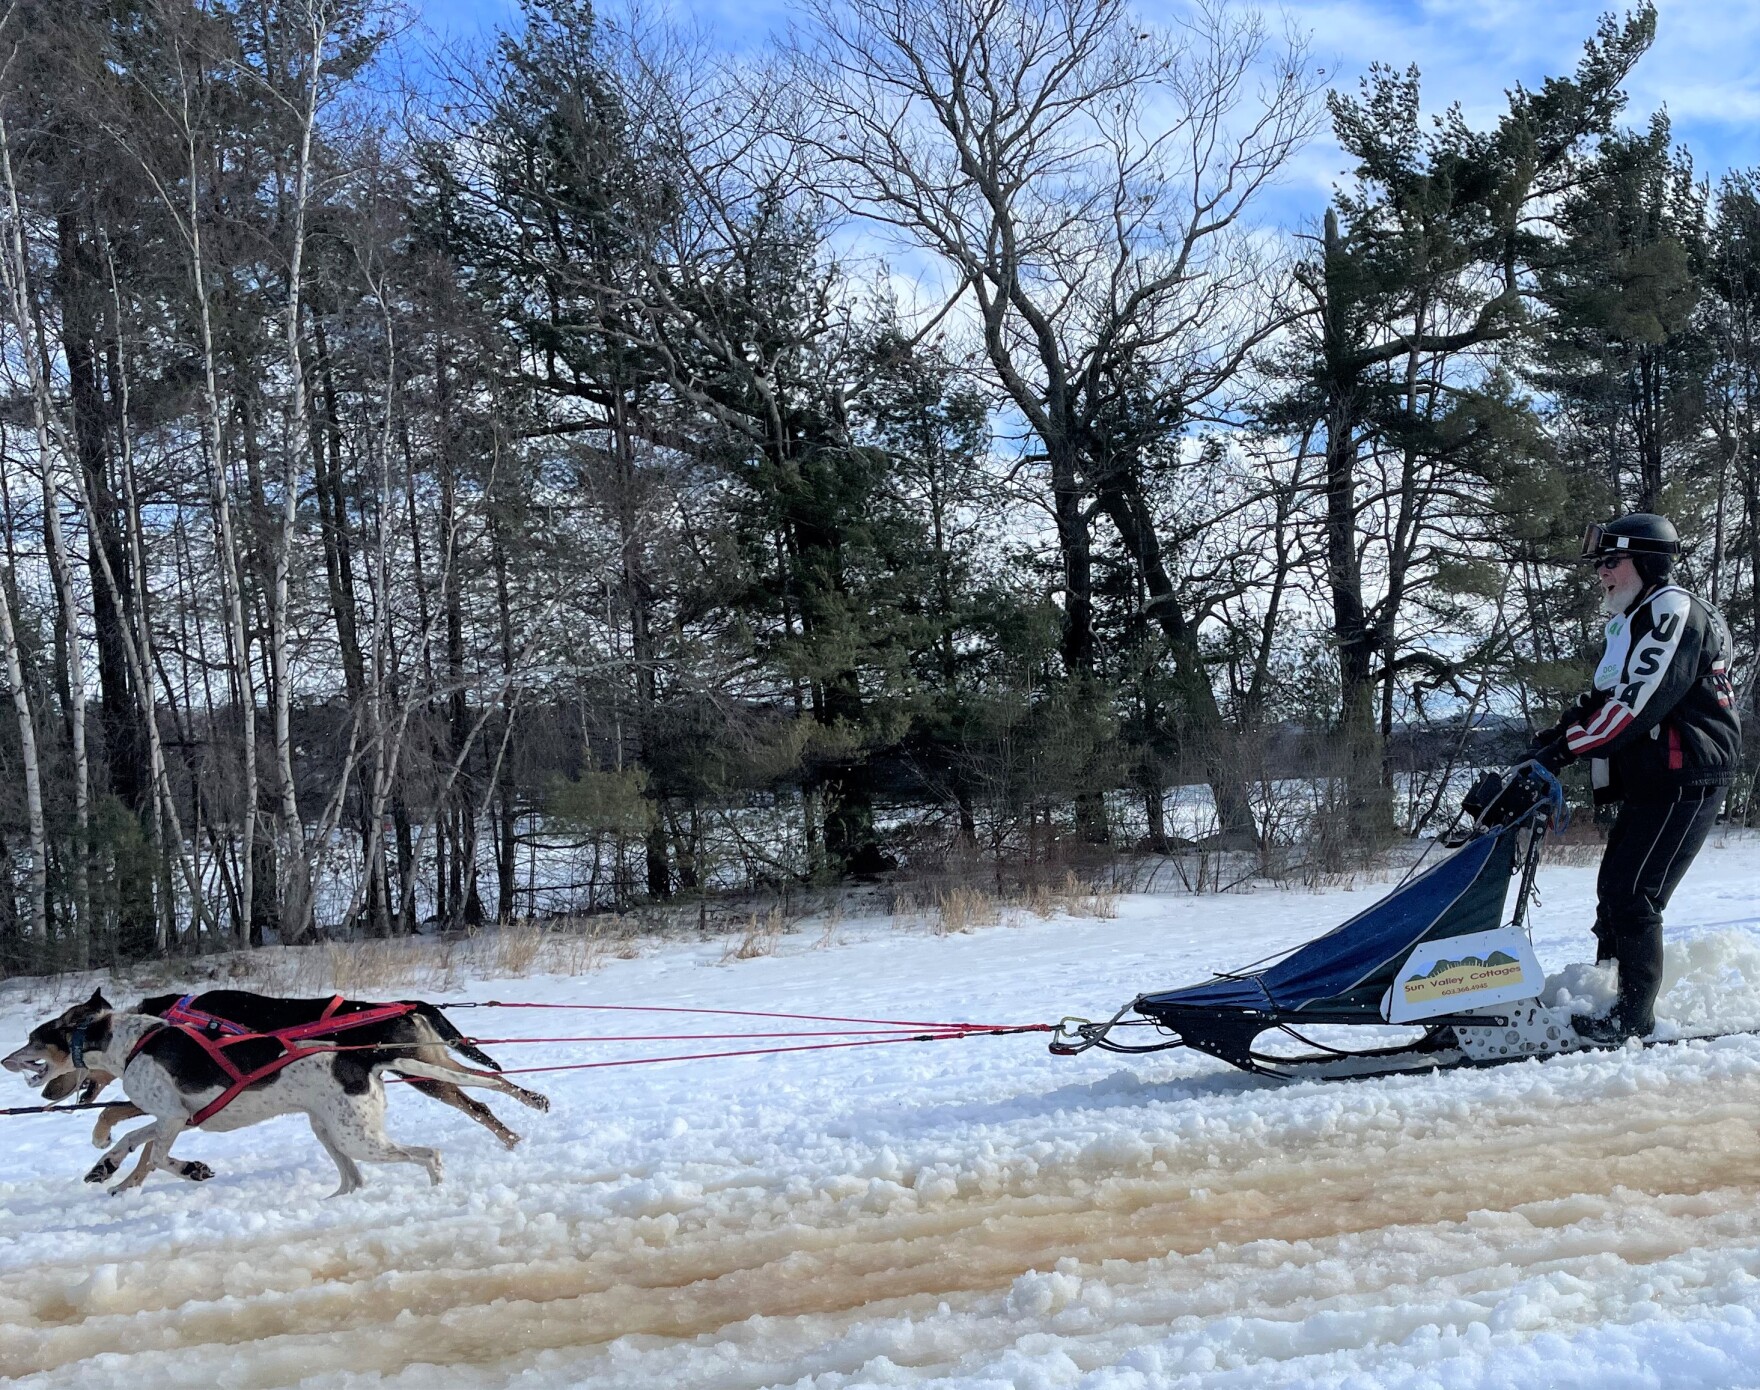 two dogs pulling a human in in a sled in slushy snow